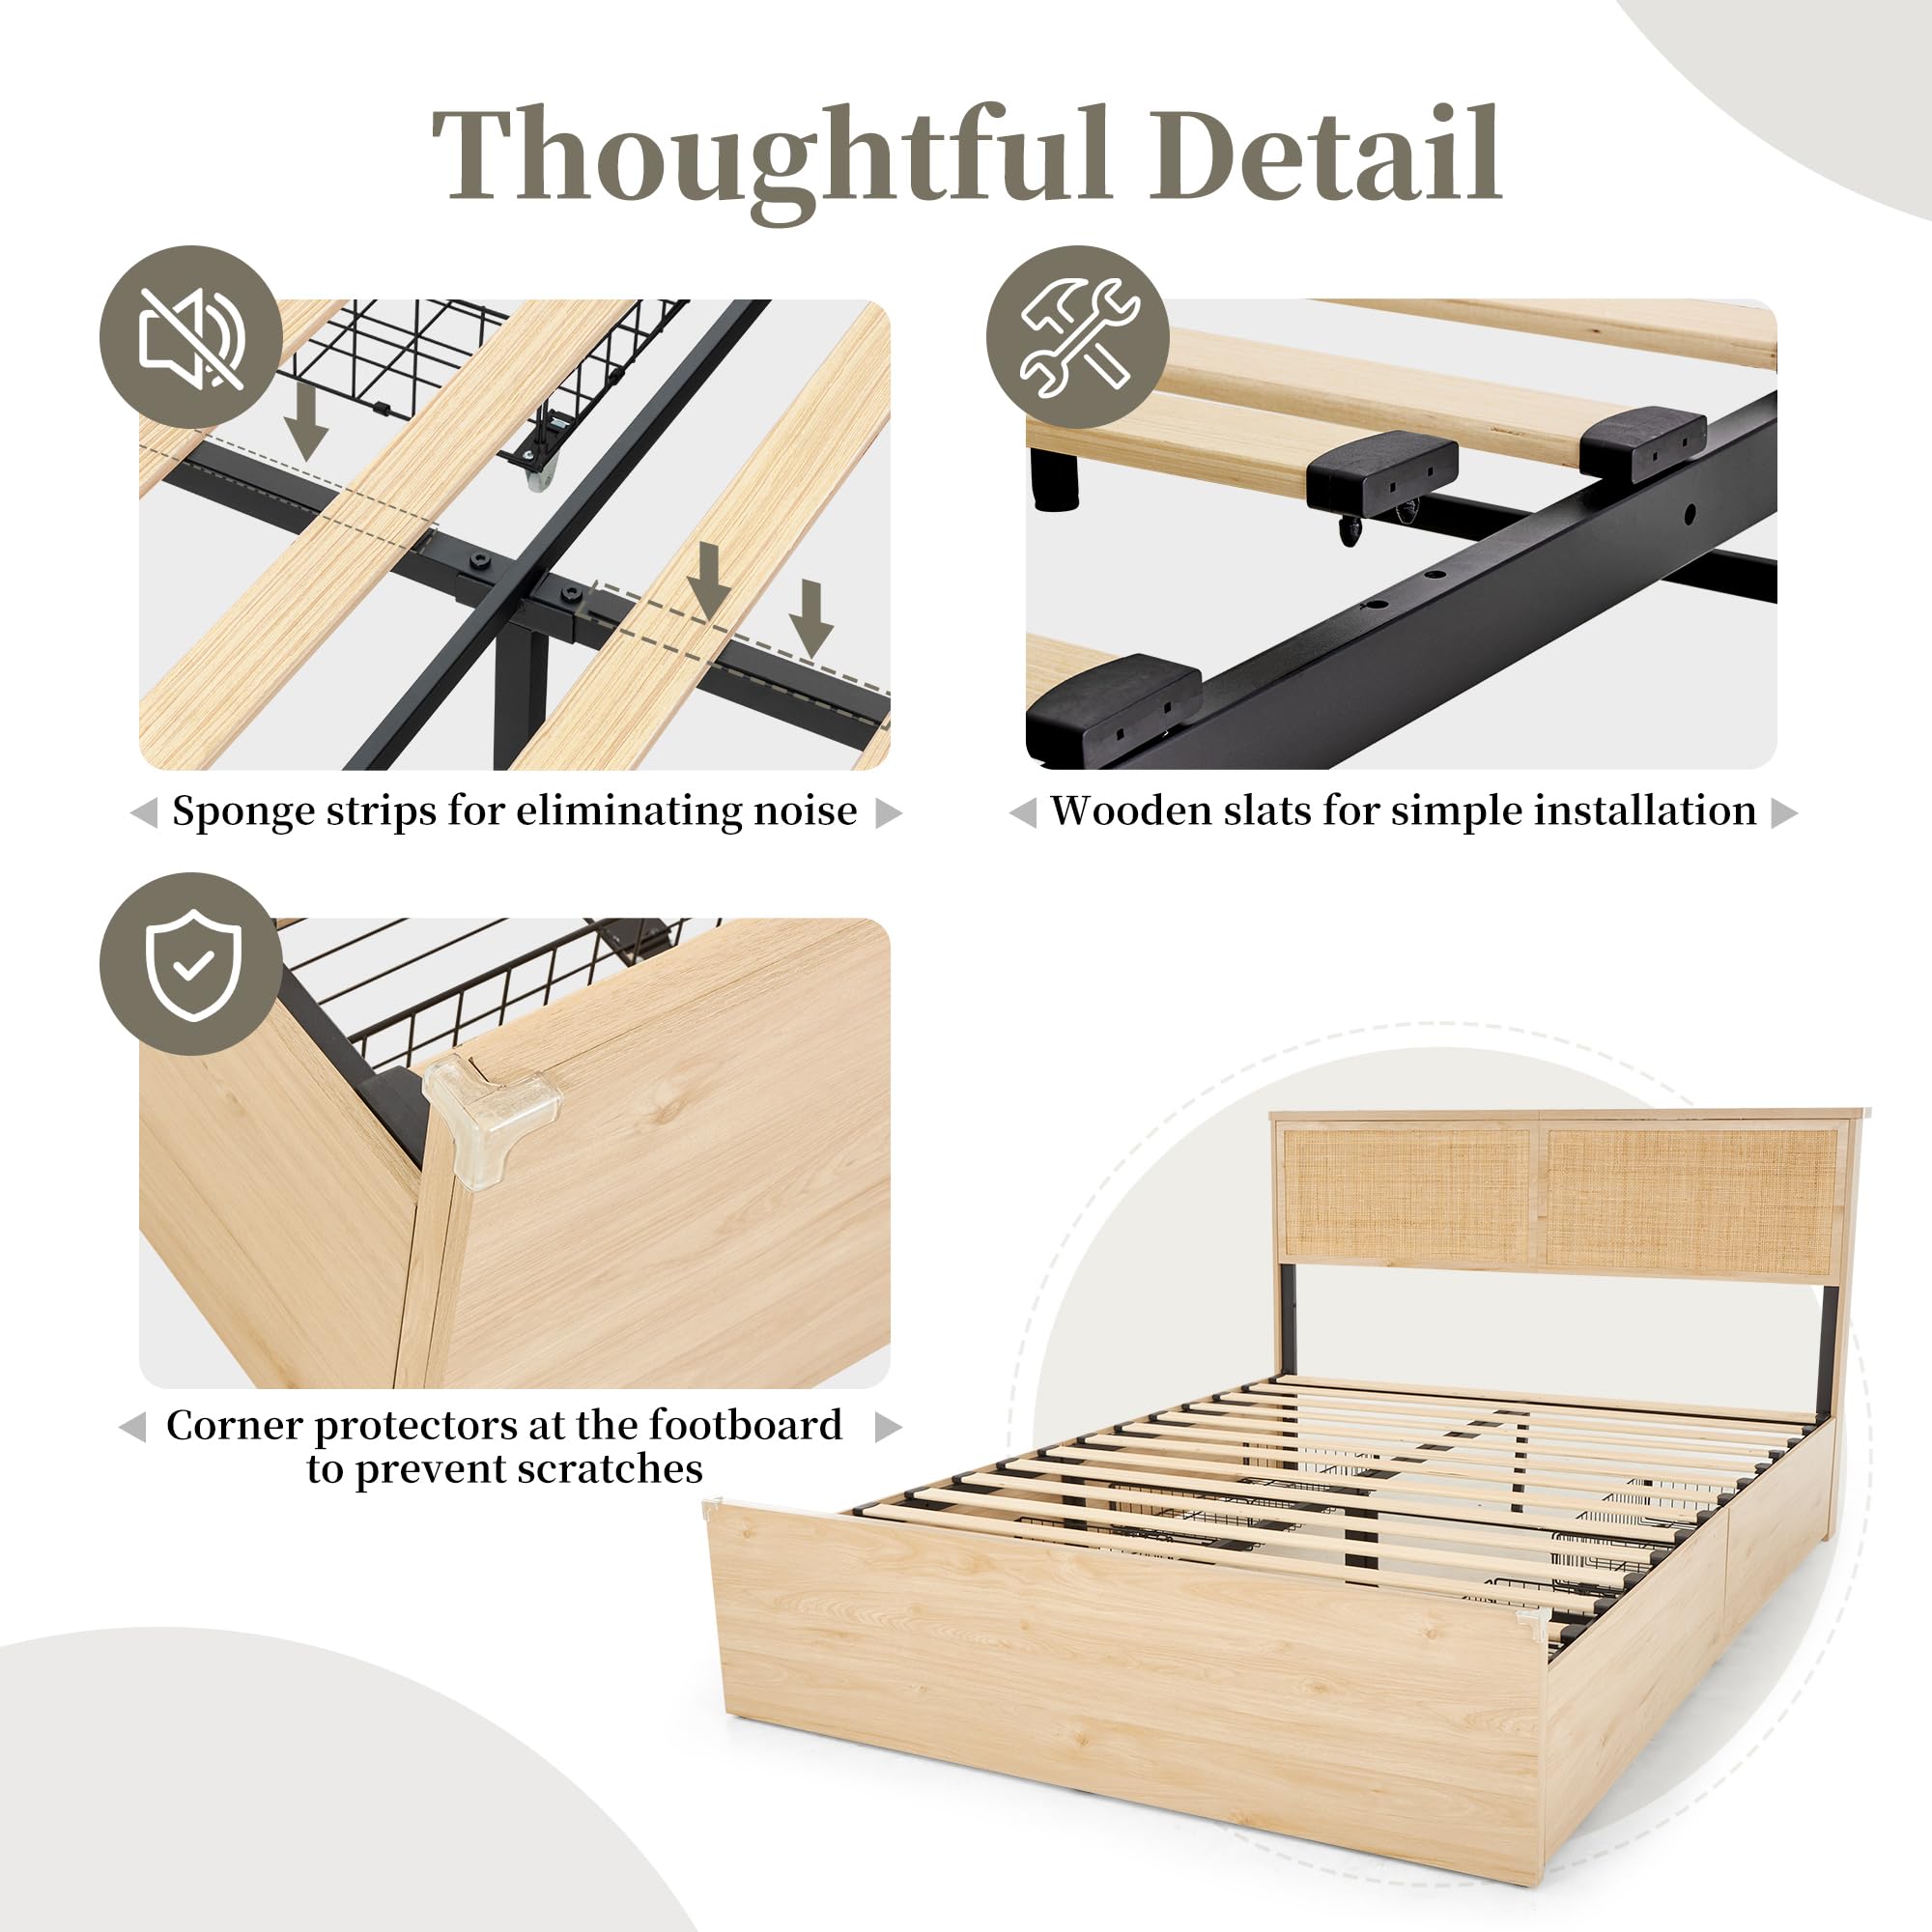 Yechen Queen Bed Frame with Natural Rattan Headboard and Wooden 4 Storage Drawers, Metal Platform with Strong Wooden Slats Support, Boho Cane Bed Mattress Foundation, No Box Spring Needed